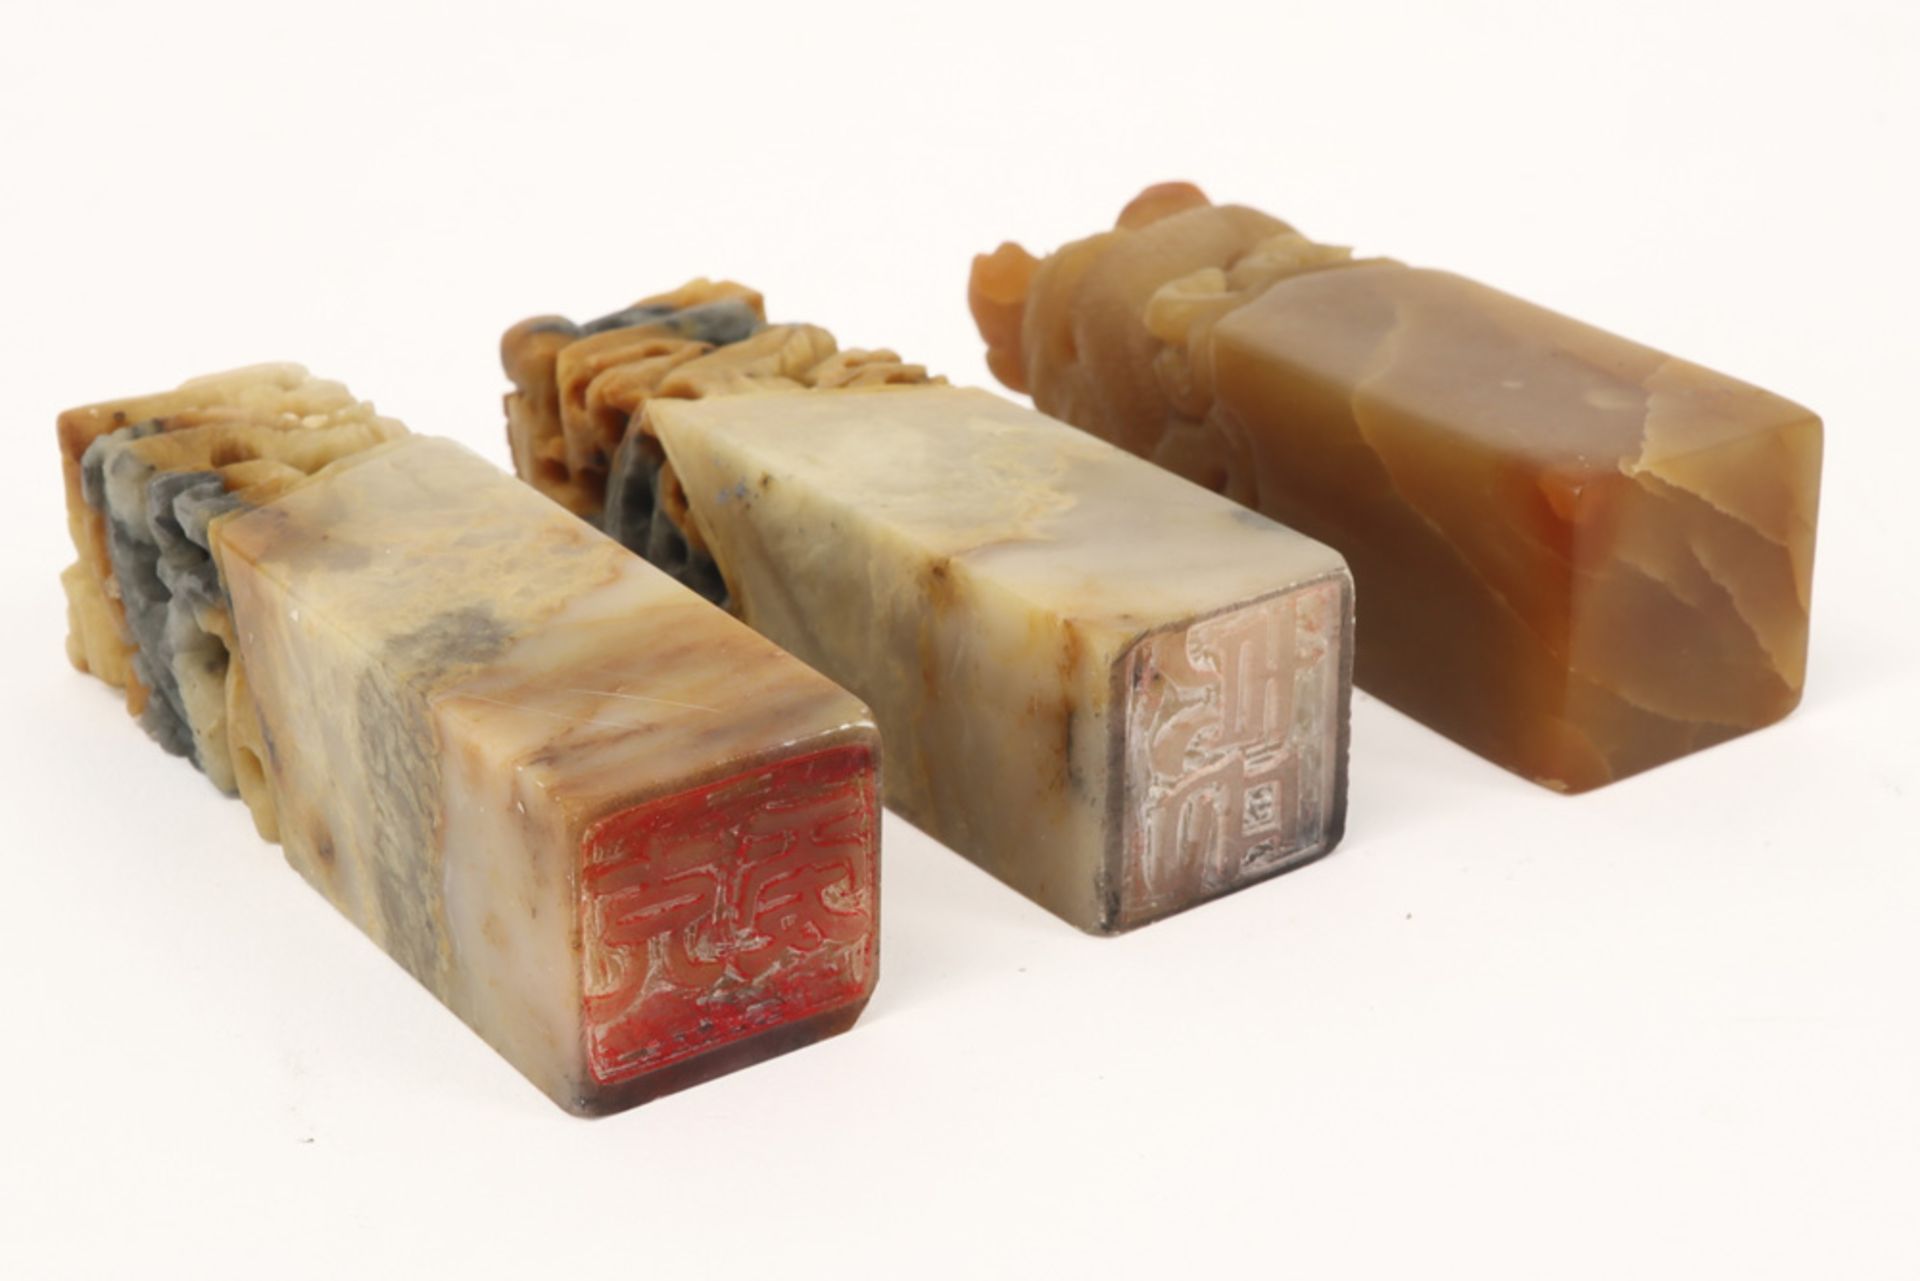 three Chinese stone stamps ||Lot van drie Chinese stempels in steen - hoogtes : ca 7 cm - Image 3 of 4